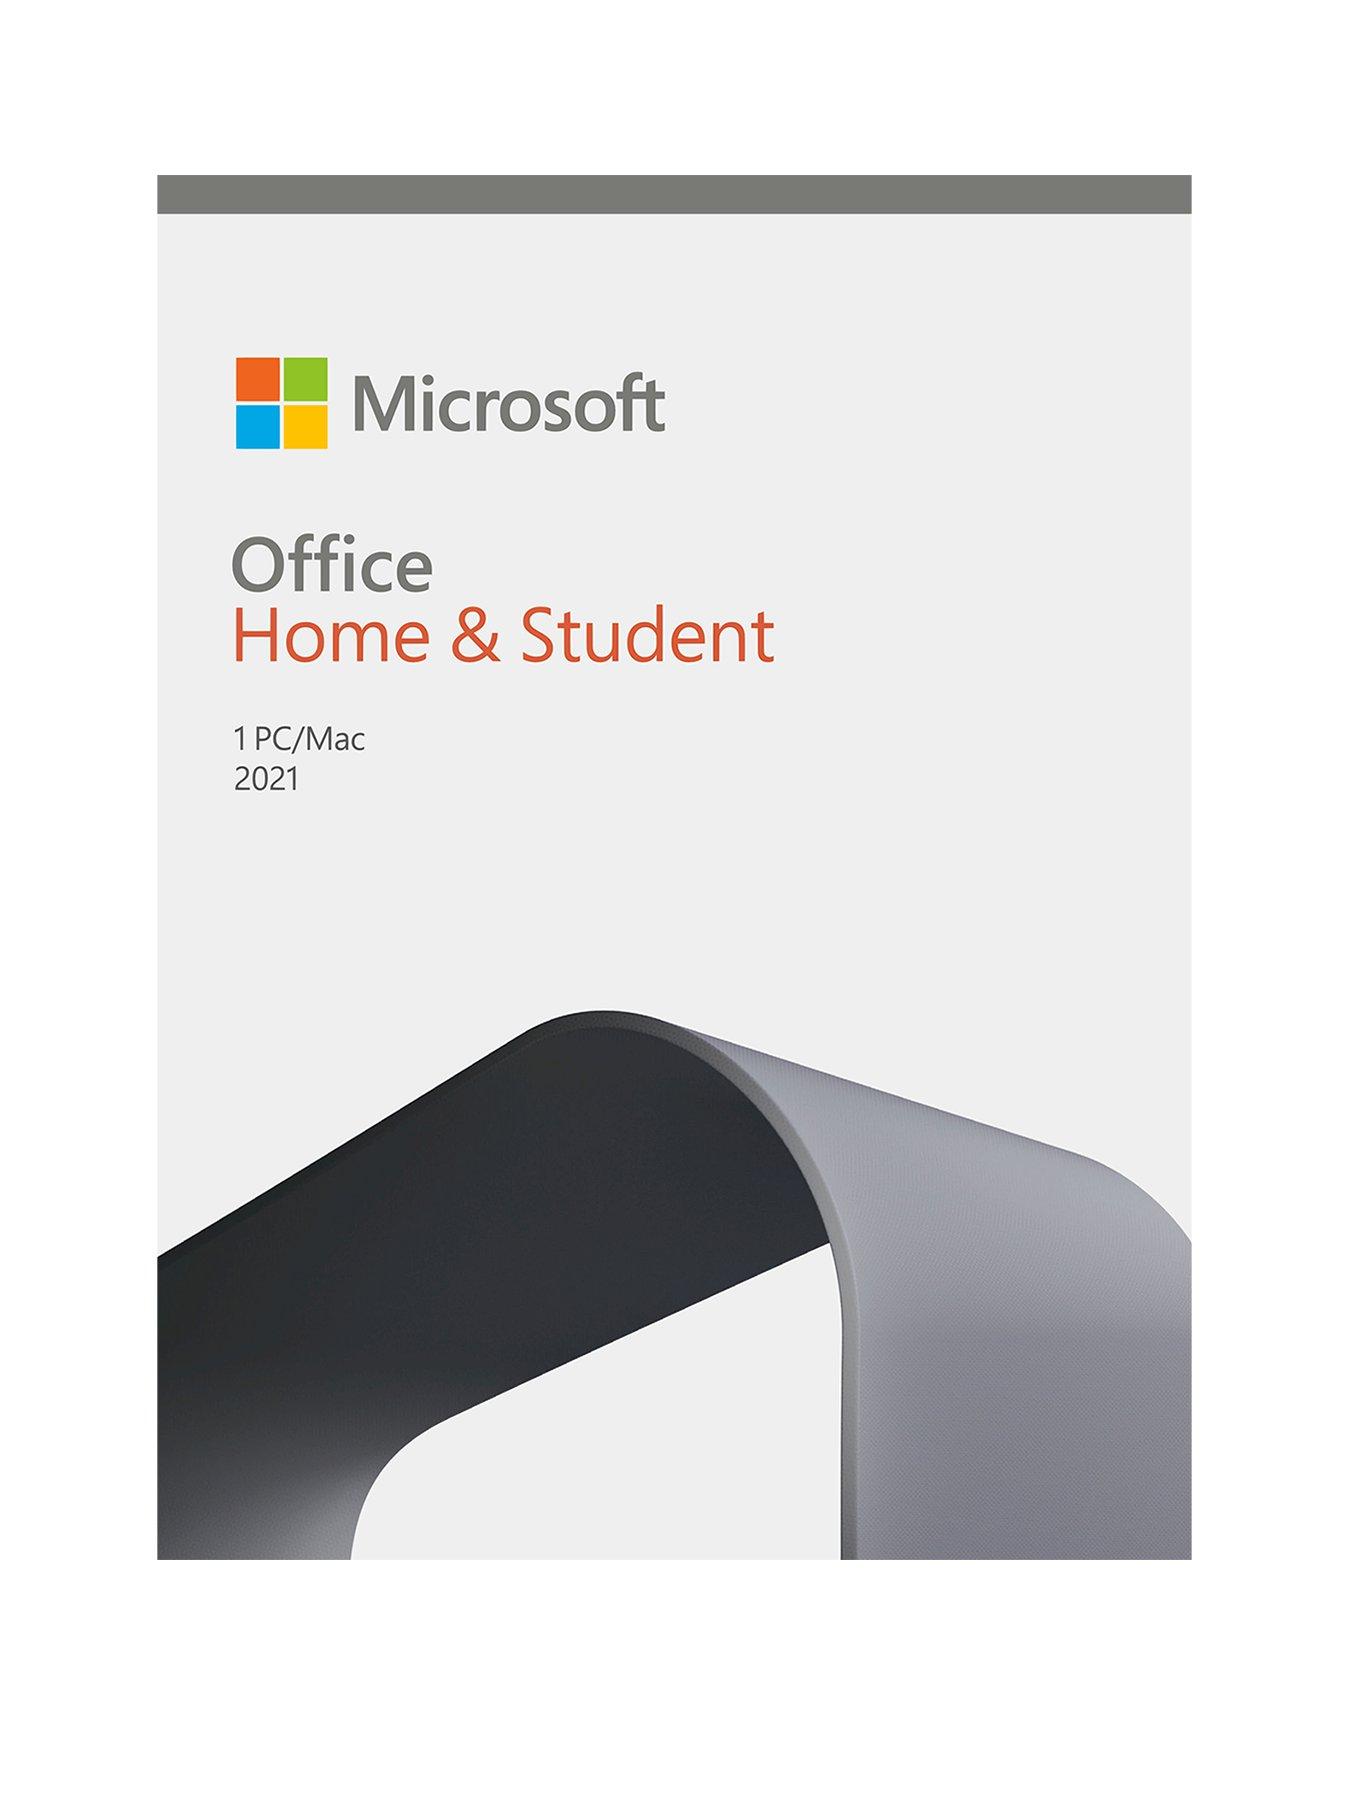 Microsoft Office Home & Student for Mac